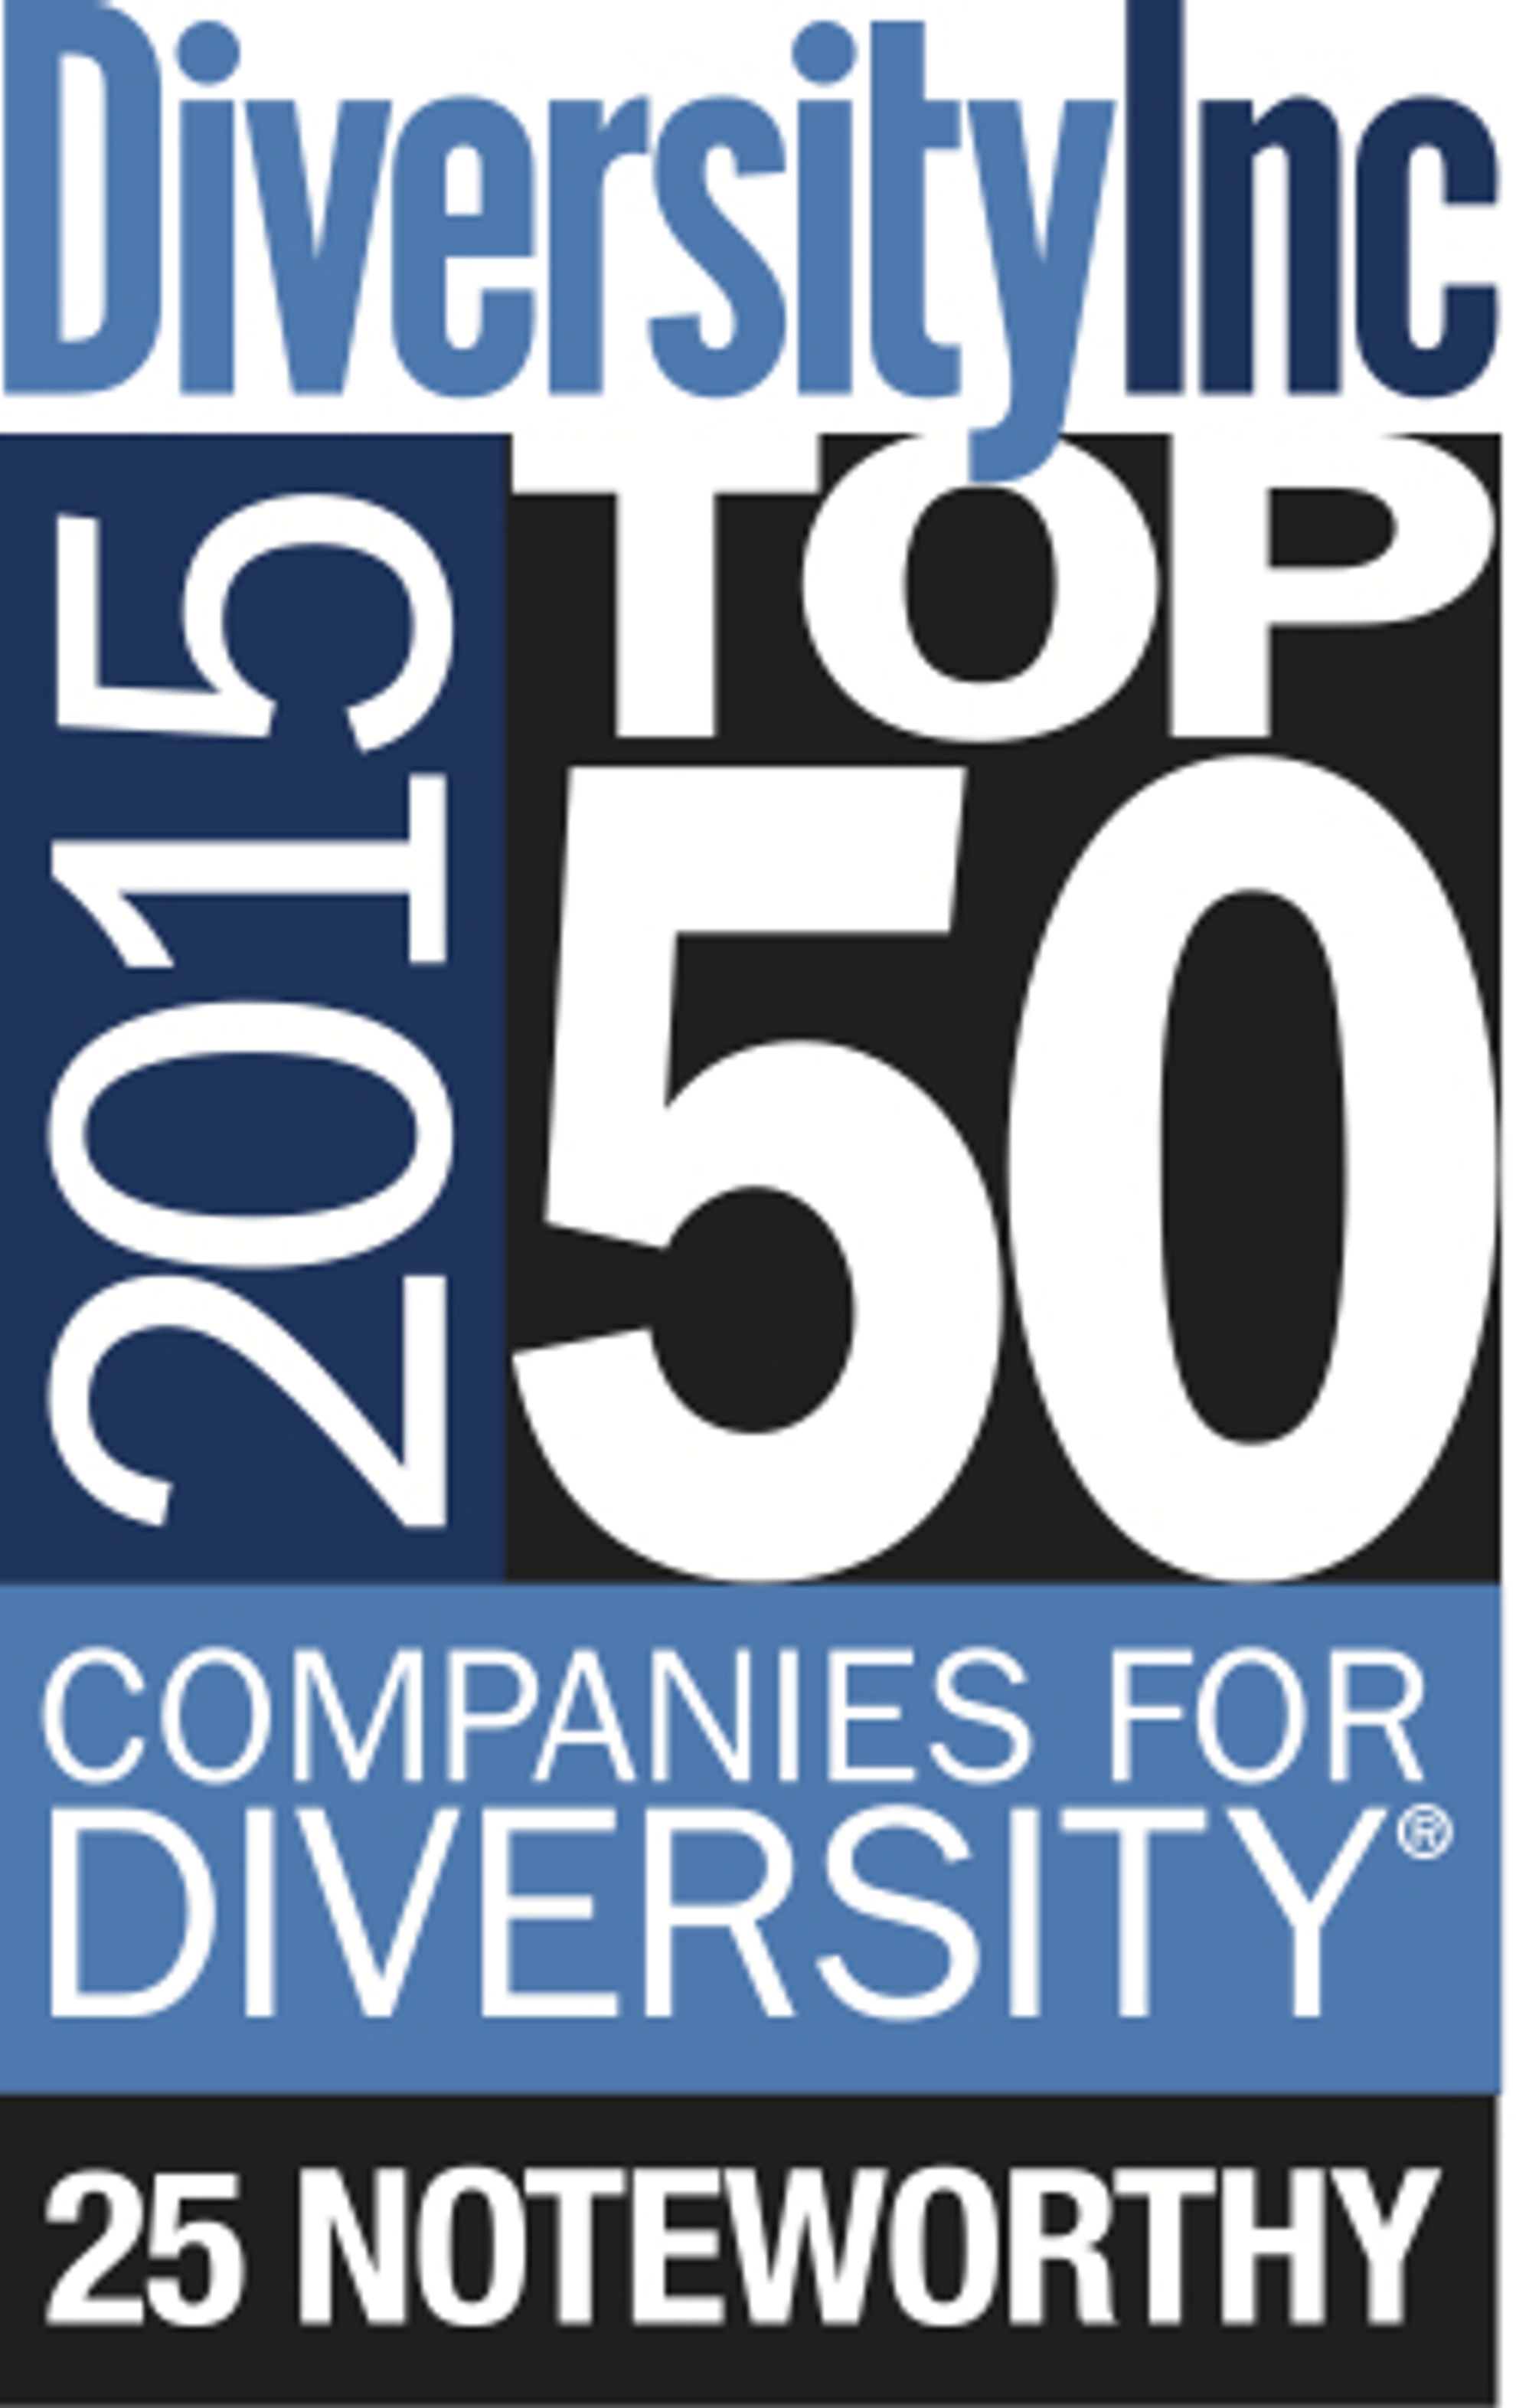 Nissan named one of DiversityInc’s 25 Noteworthy Companies